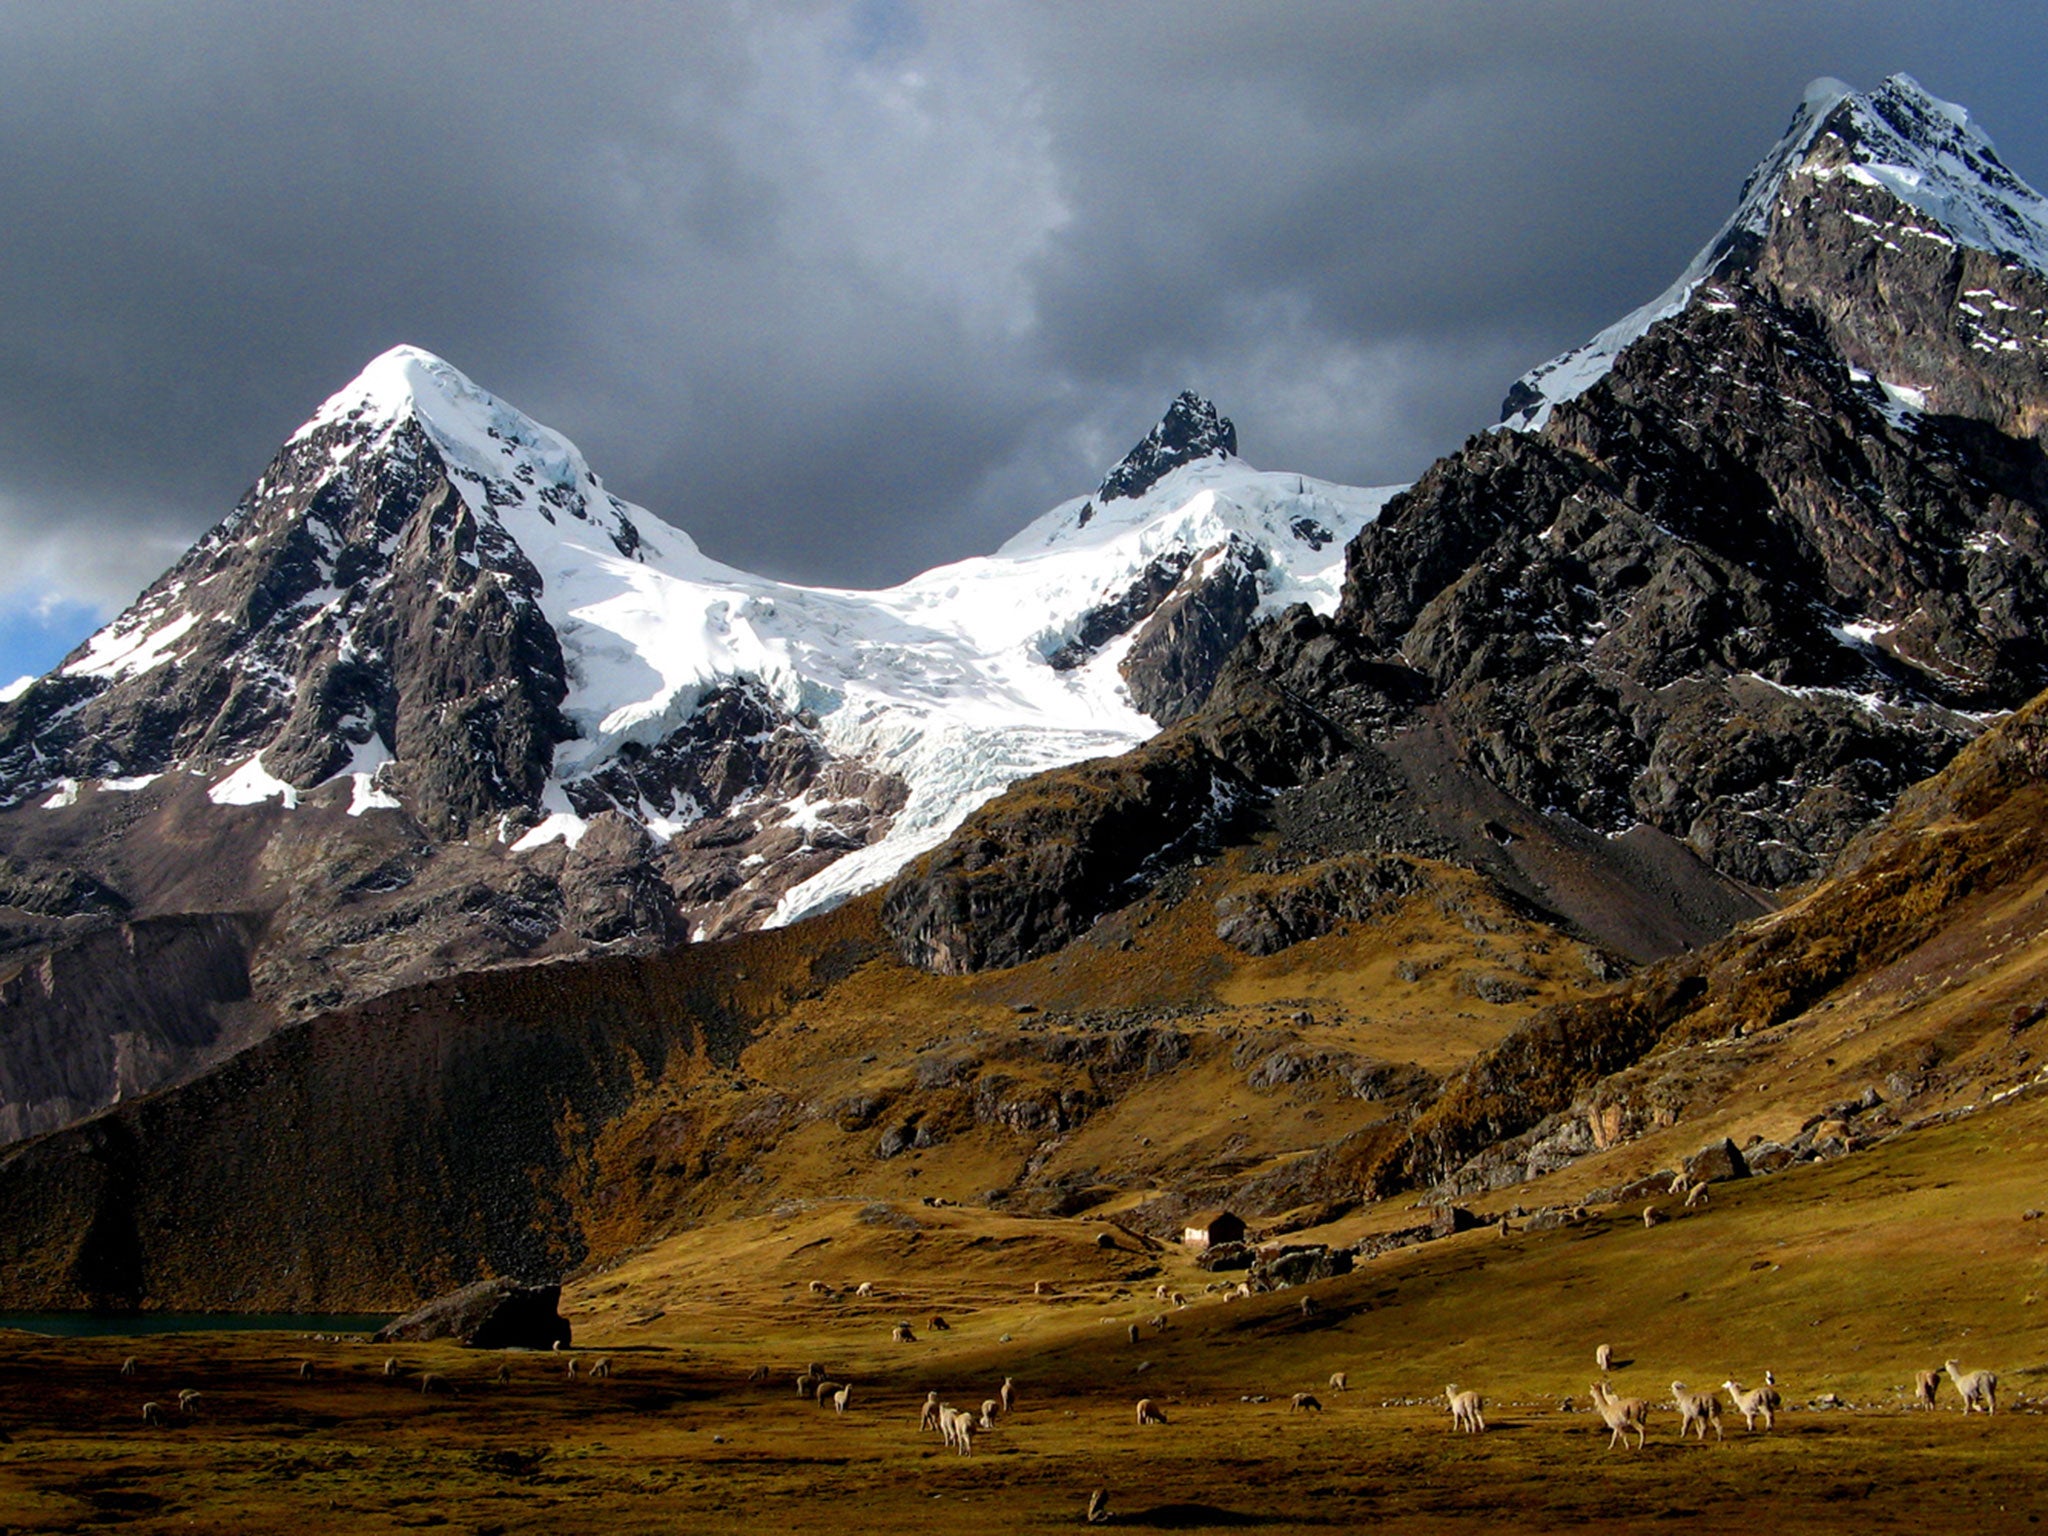 Cecilio Tercero López was abseiling in the Peruvian Andes